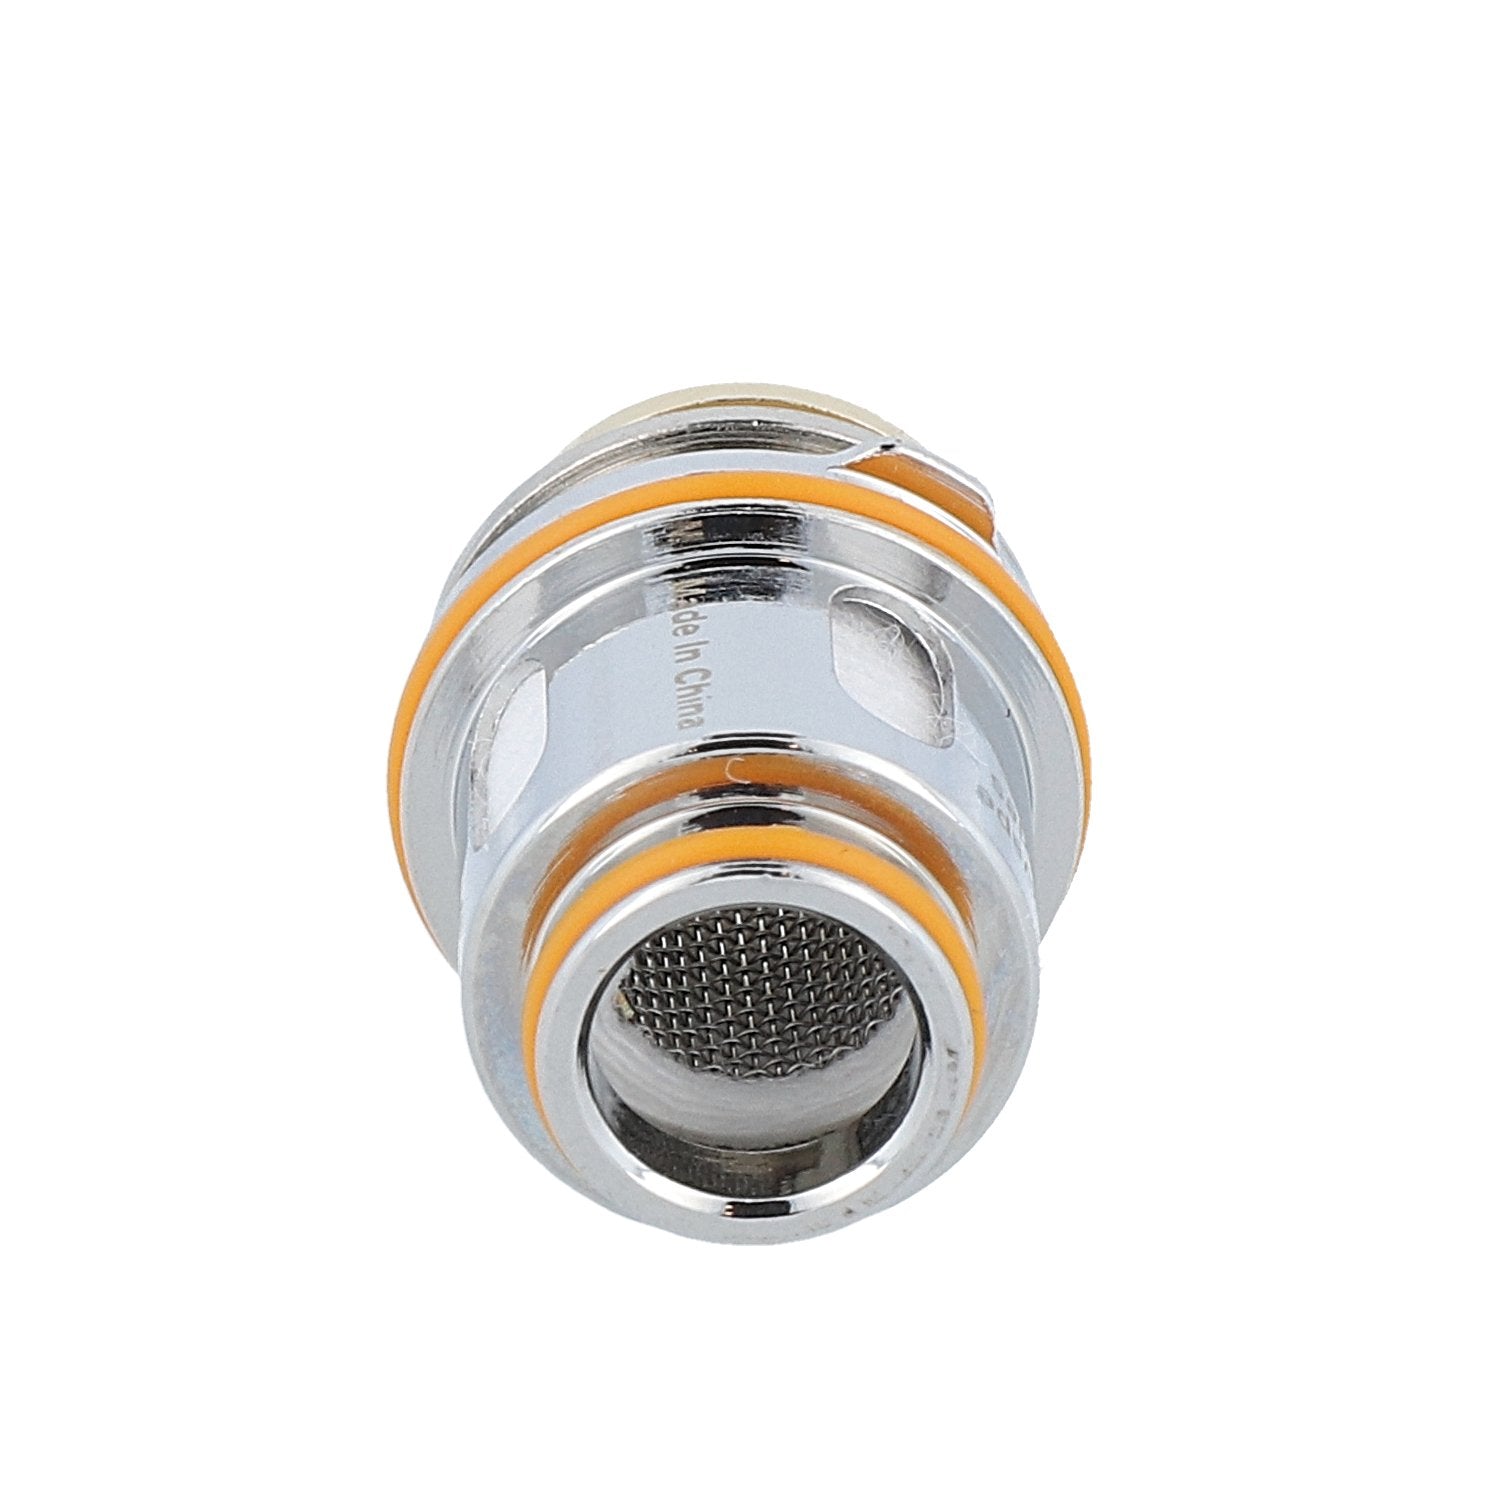 GeekVape - Z Series - Heads 0,15 Ohm (5 Stück pro Packung) - 1er Packung 0,15 Ohm - Vapes4you